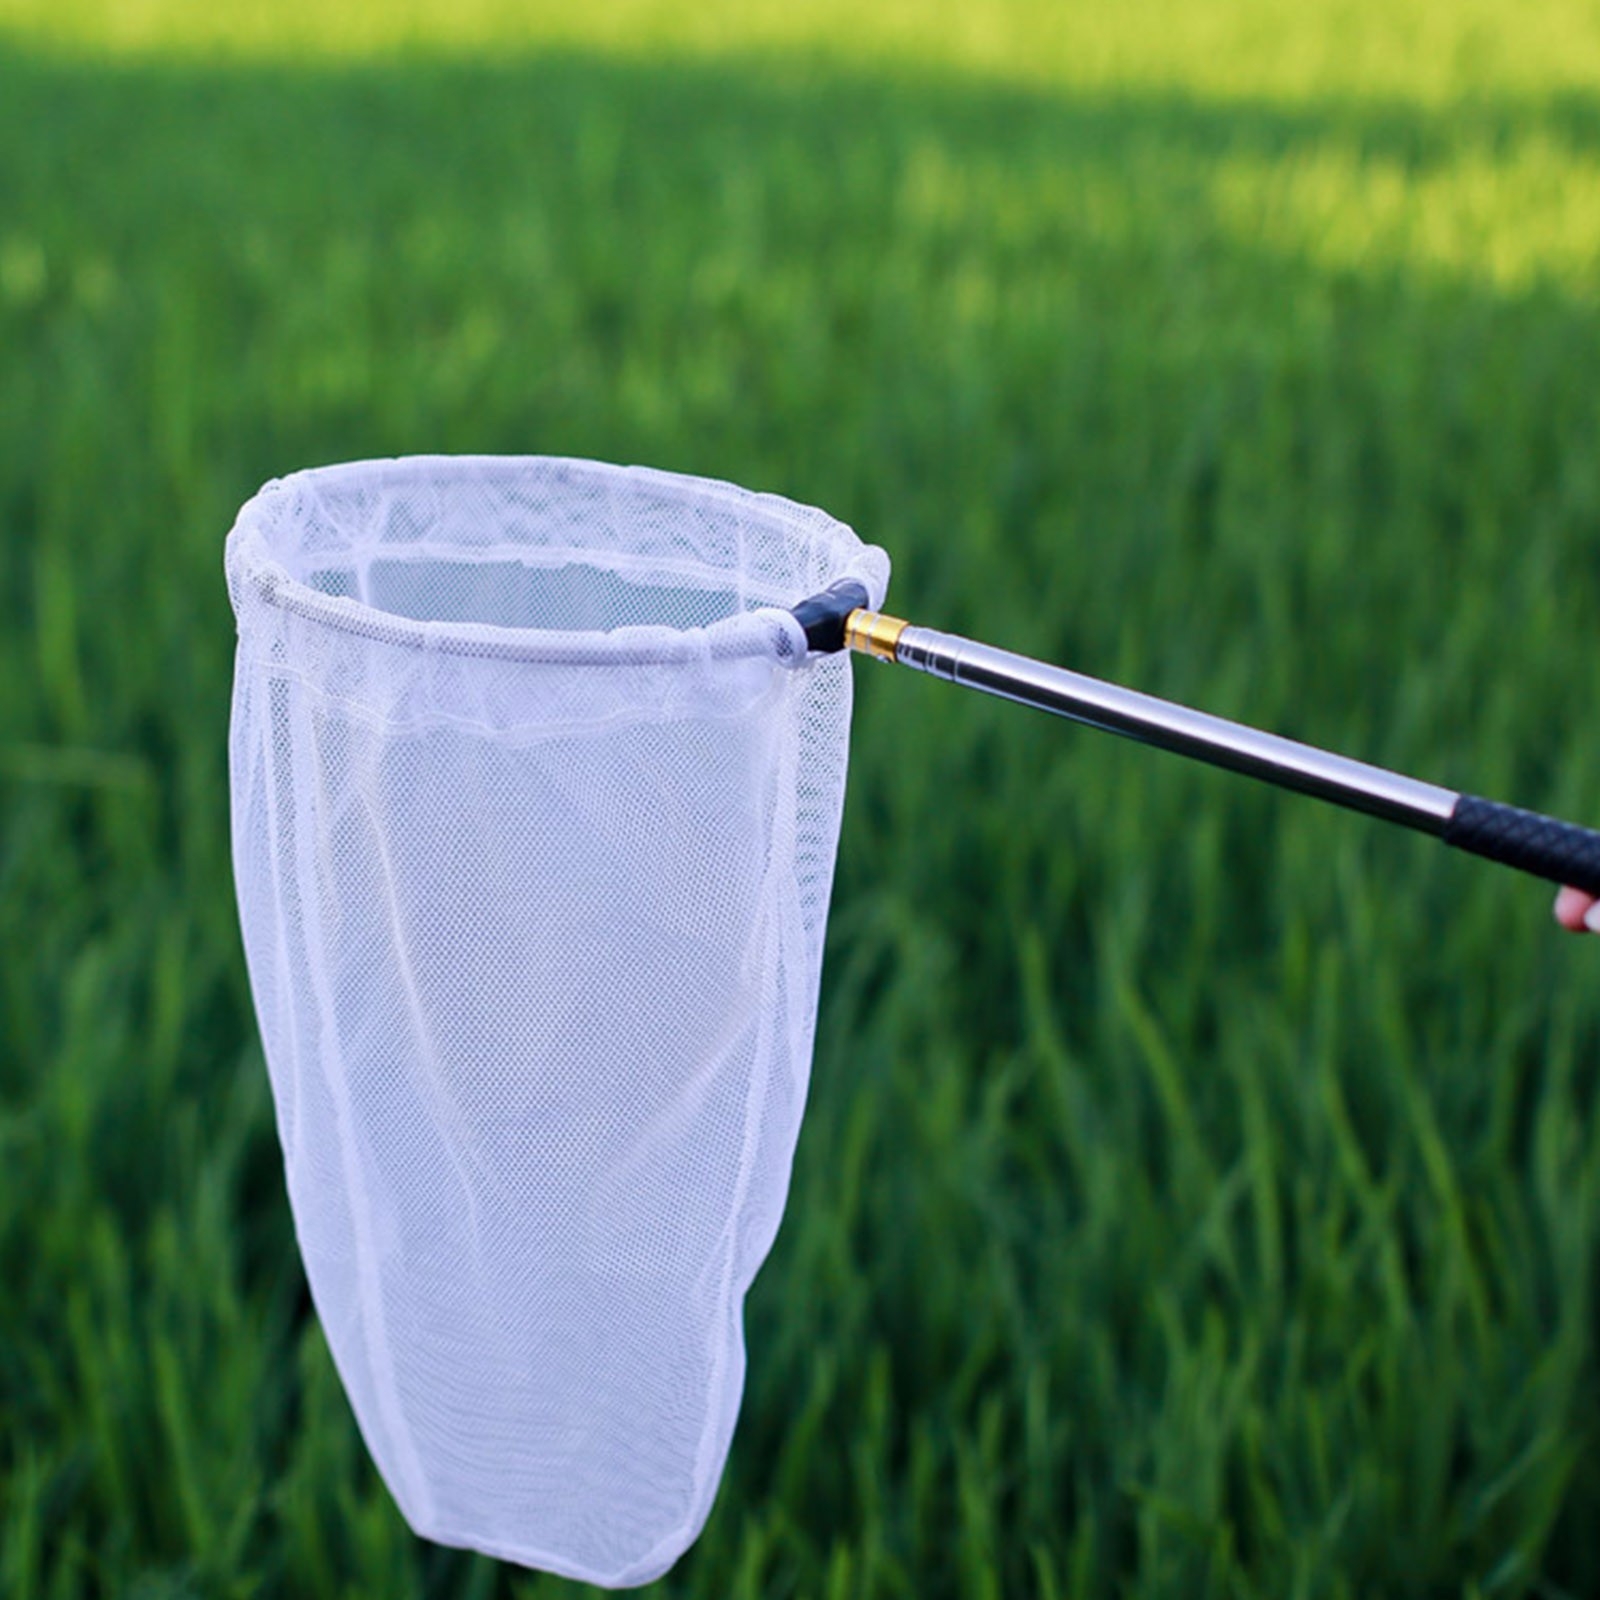 Outdoor Catching Catching Butterfly Net Fishing Net Bag Stainless